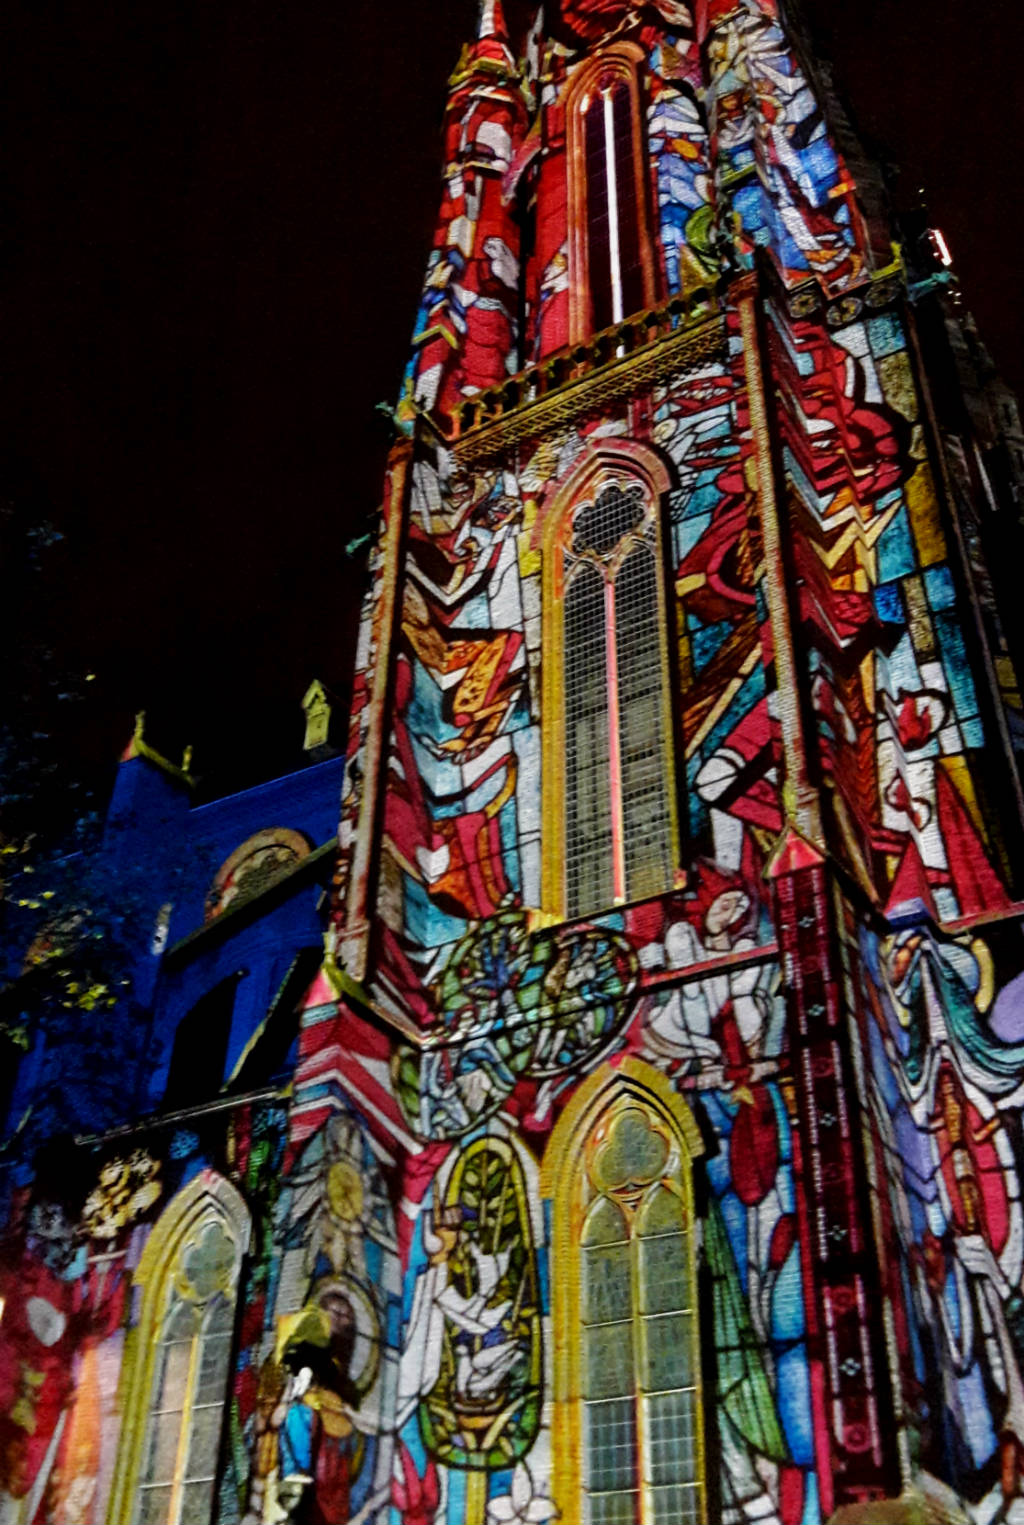 Light festival GLOW Eindhoven | Your Dutch Guide